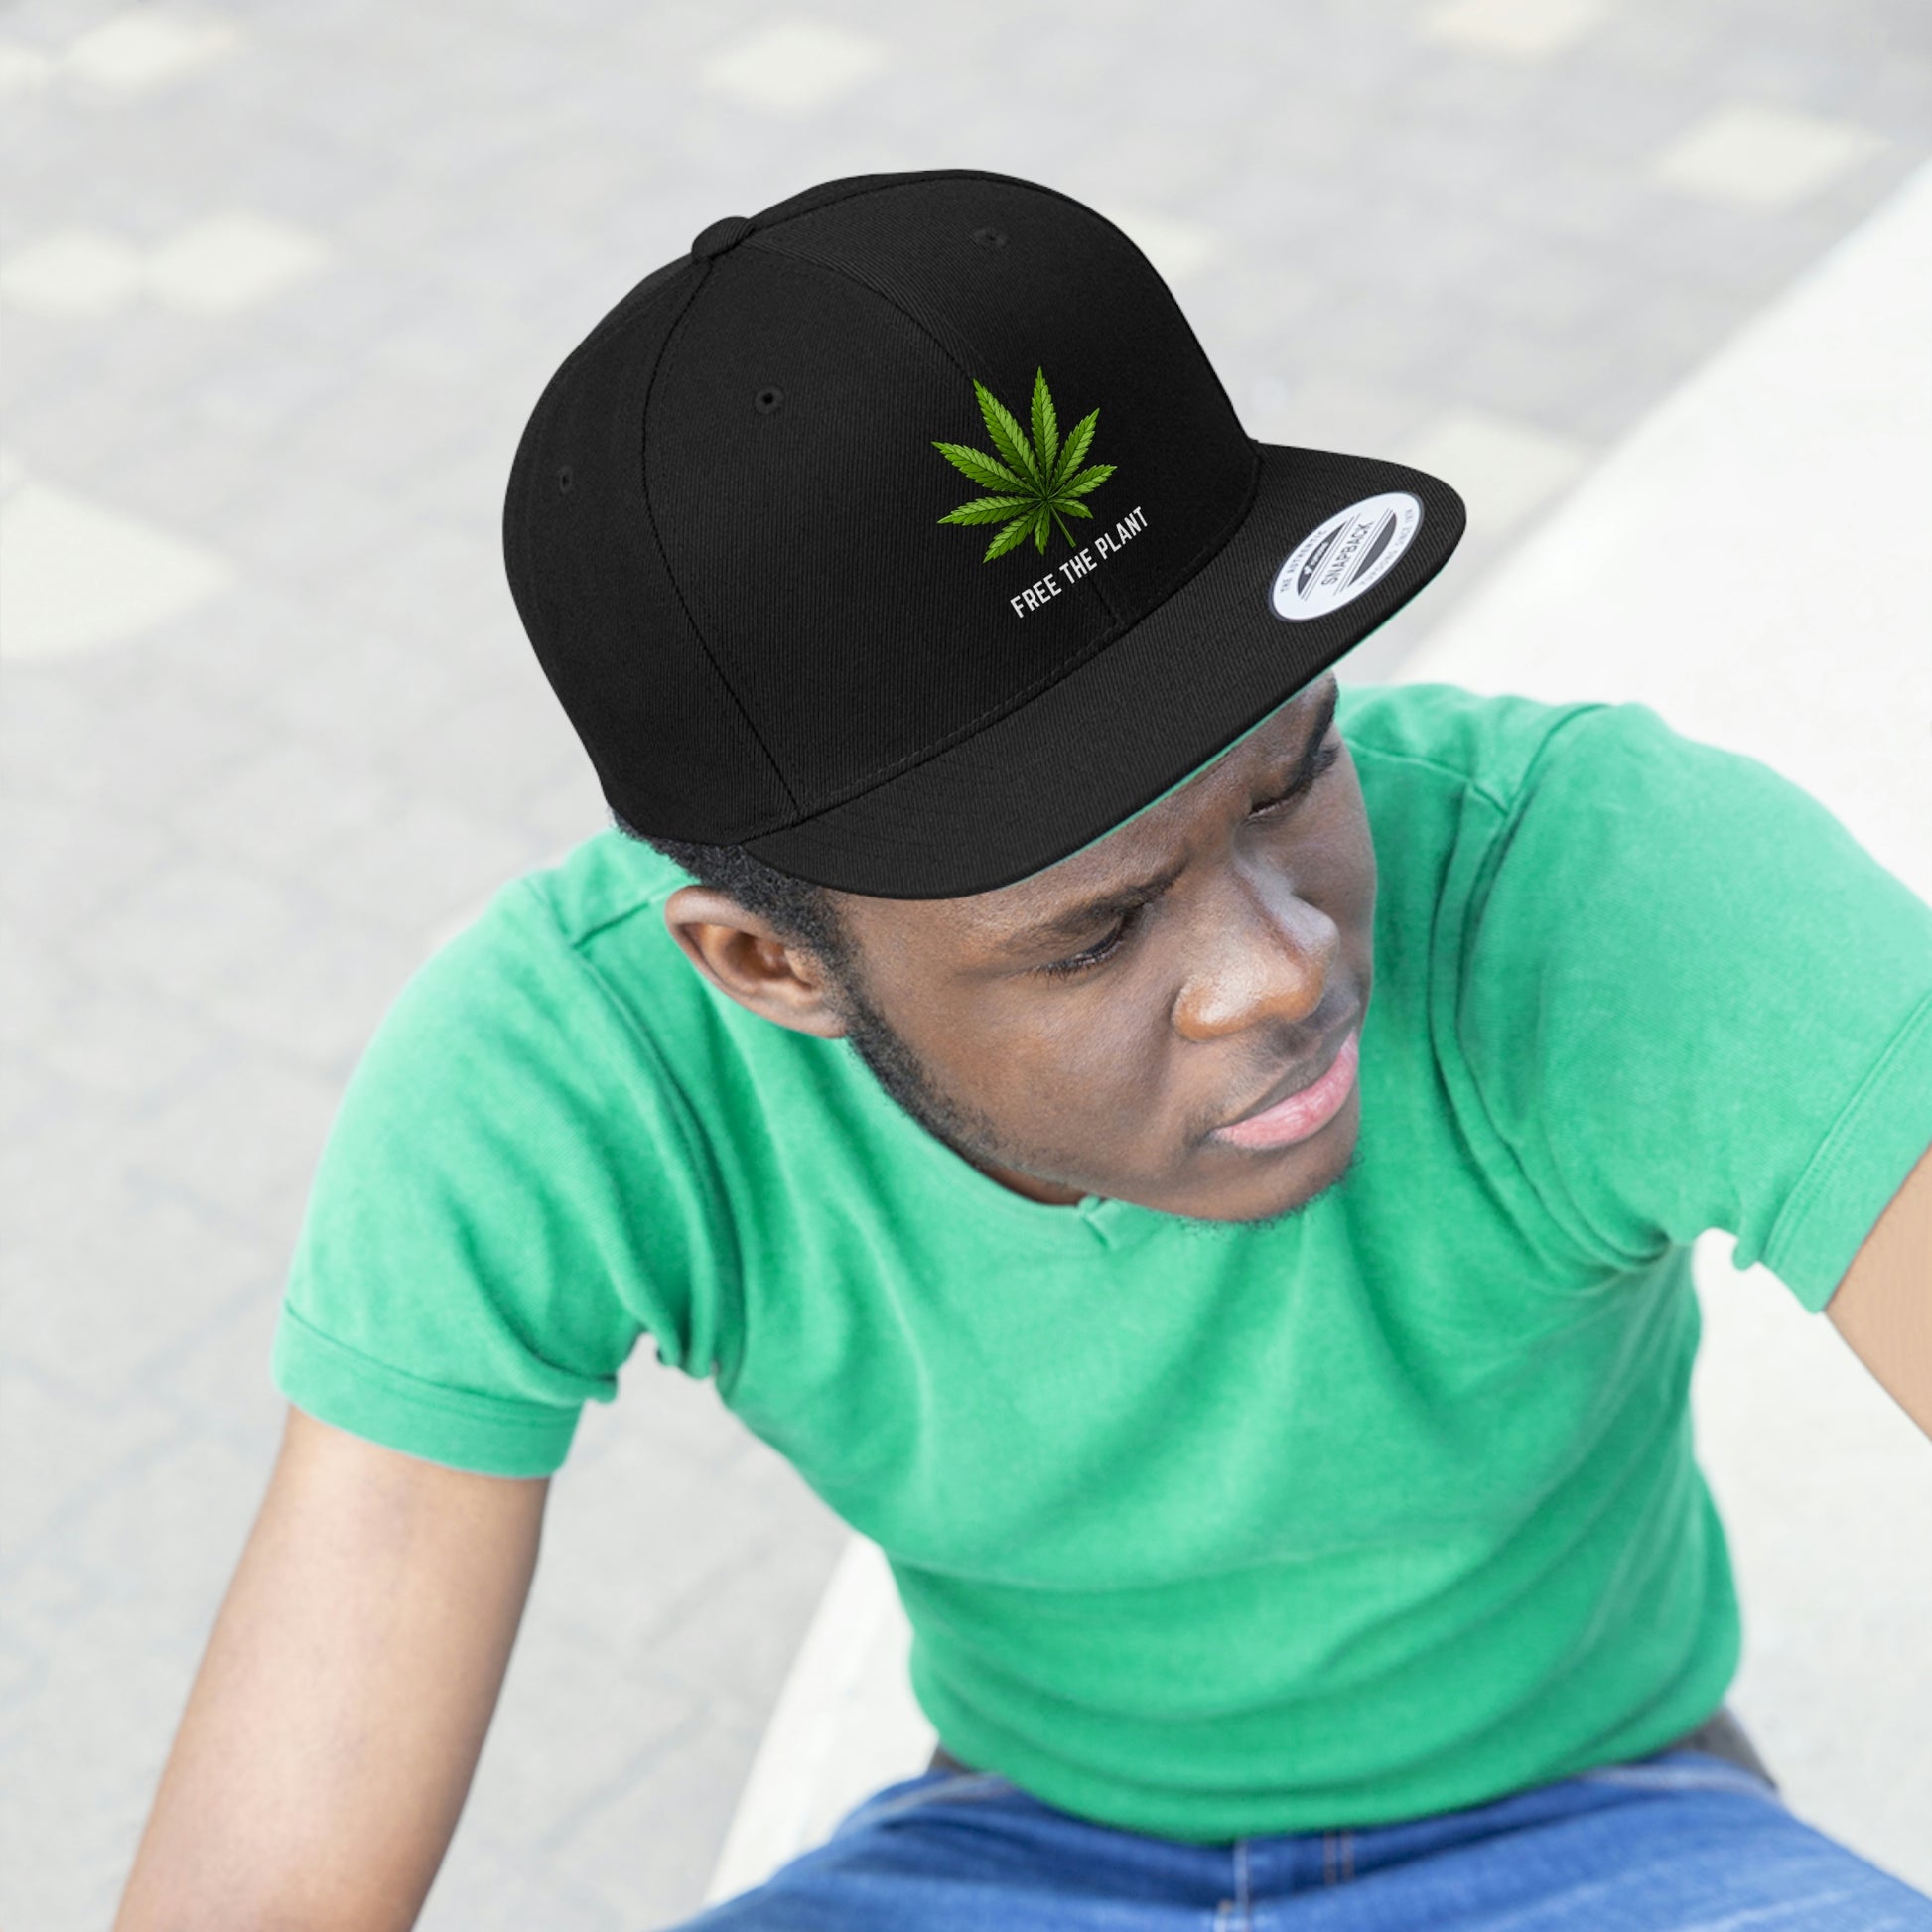 A young man looks determined with the all black Free The Plant Snapback Hat with a green underbill and a matching green t-shirt